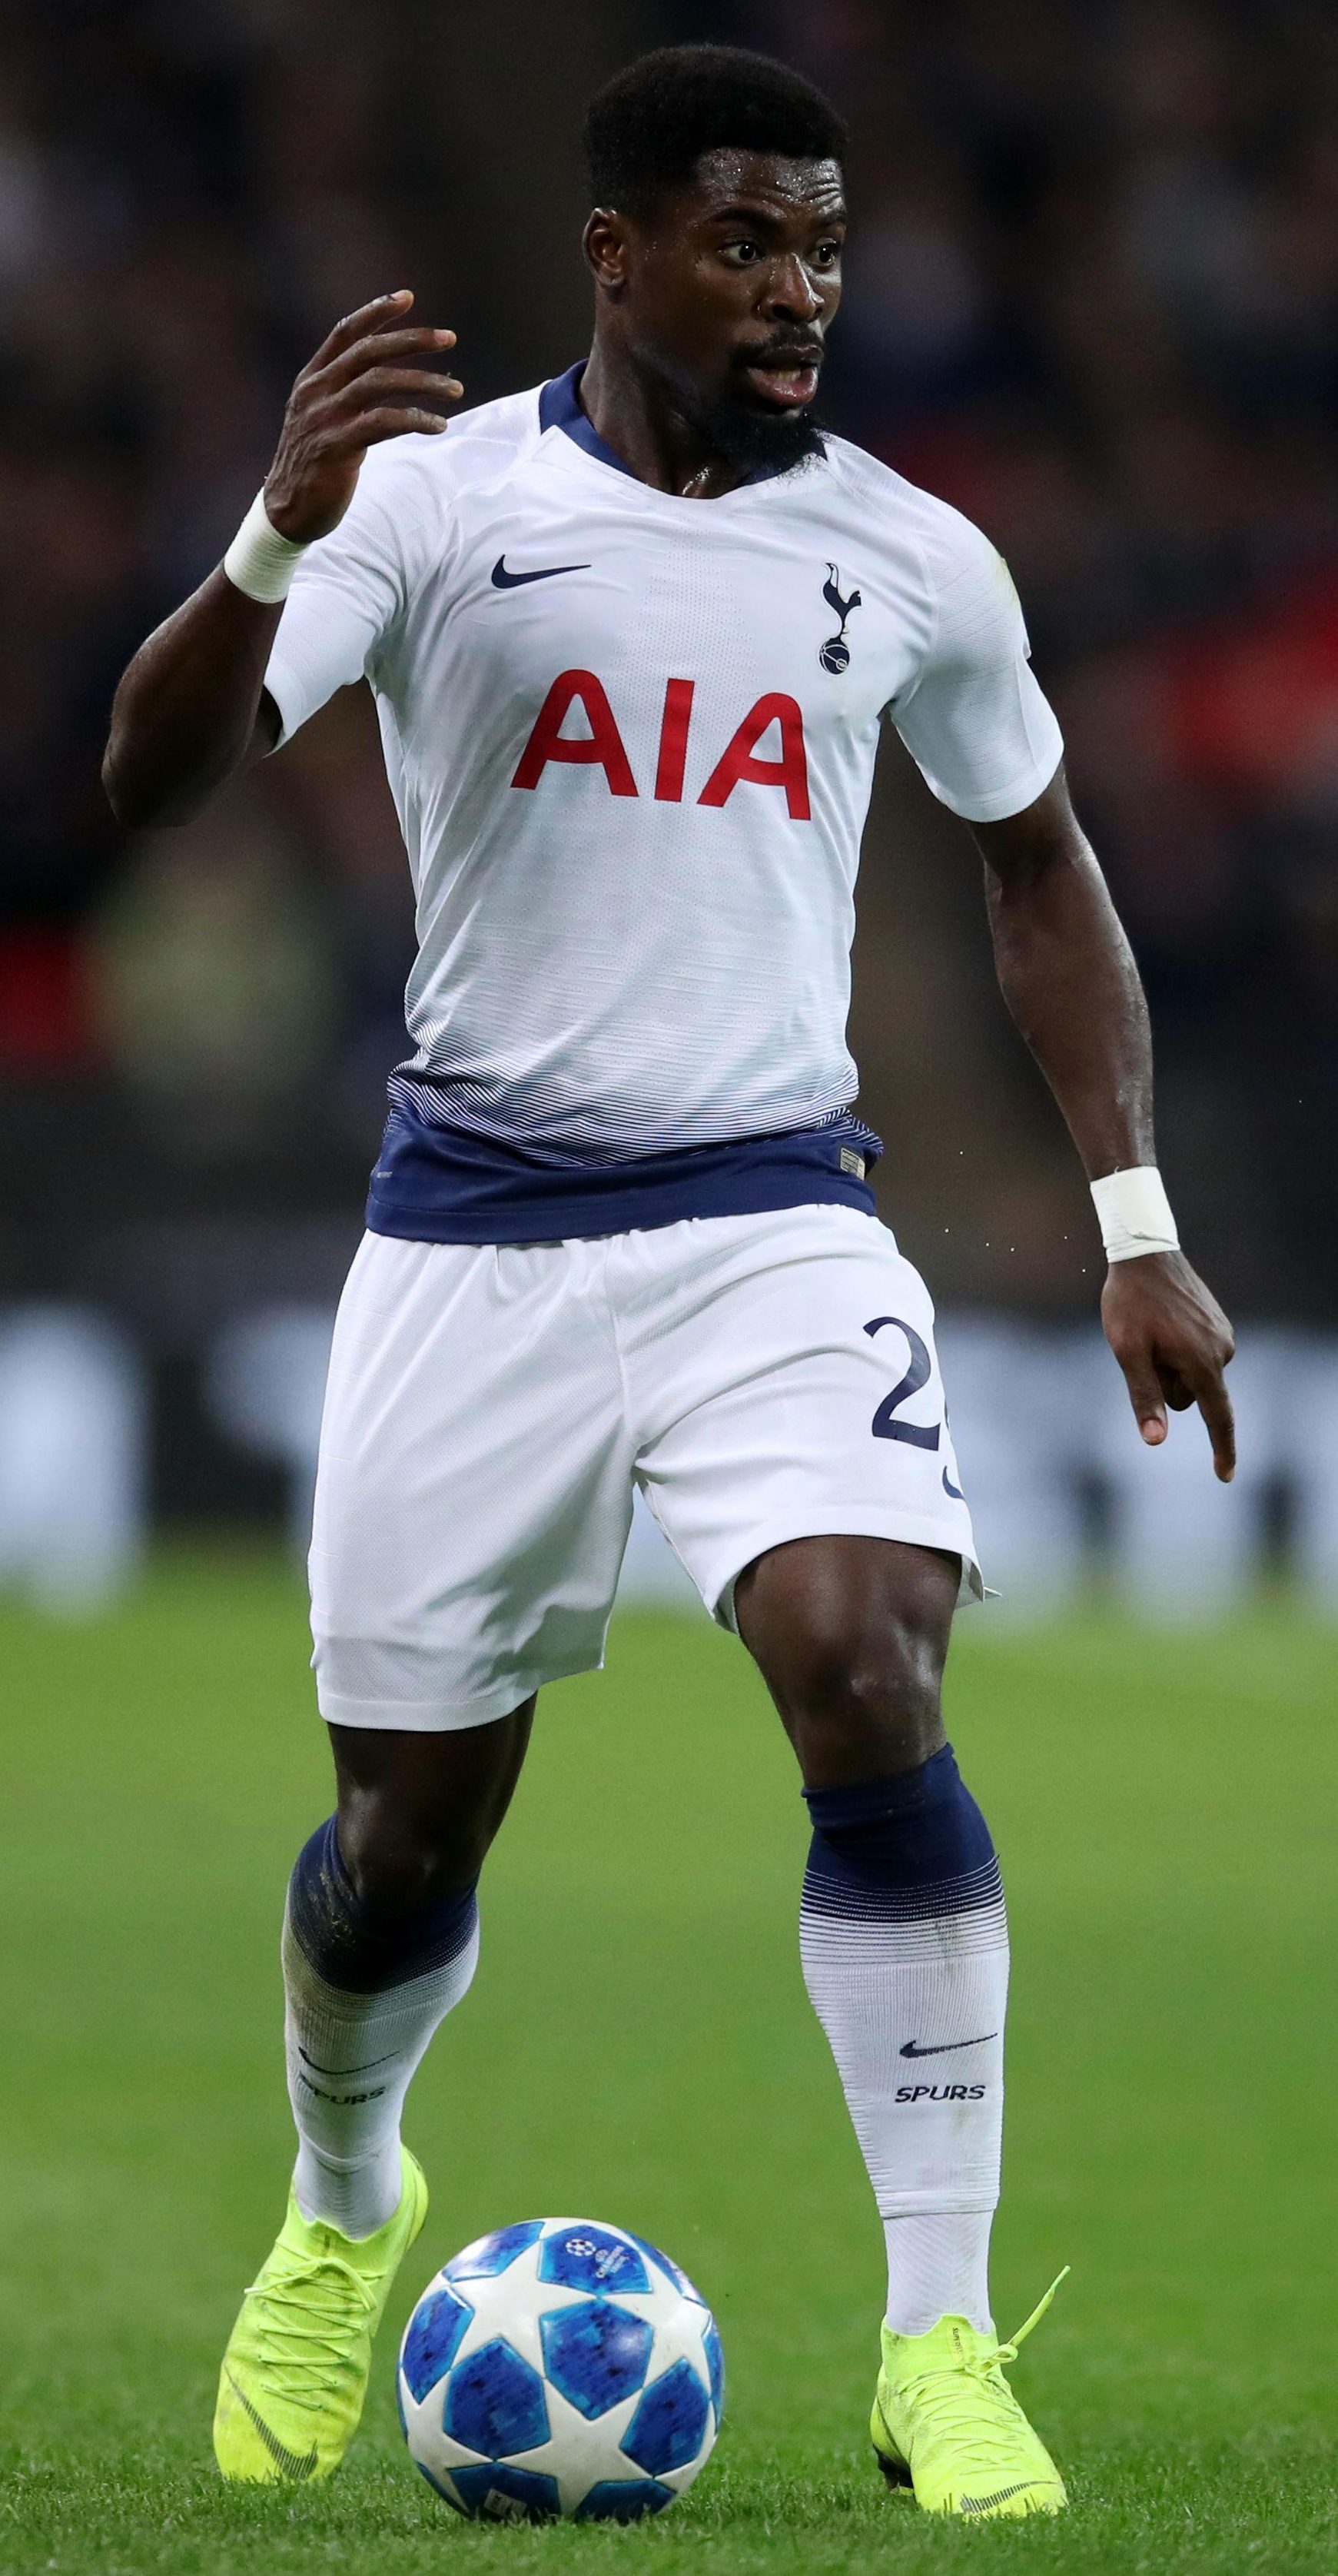 Tottenham Right Back Aurier S Girlfriend Accused Of Sex Tape Blackmail